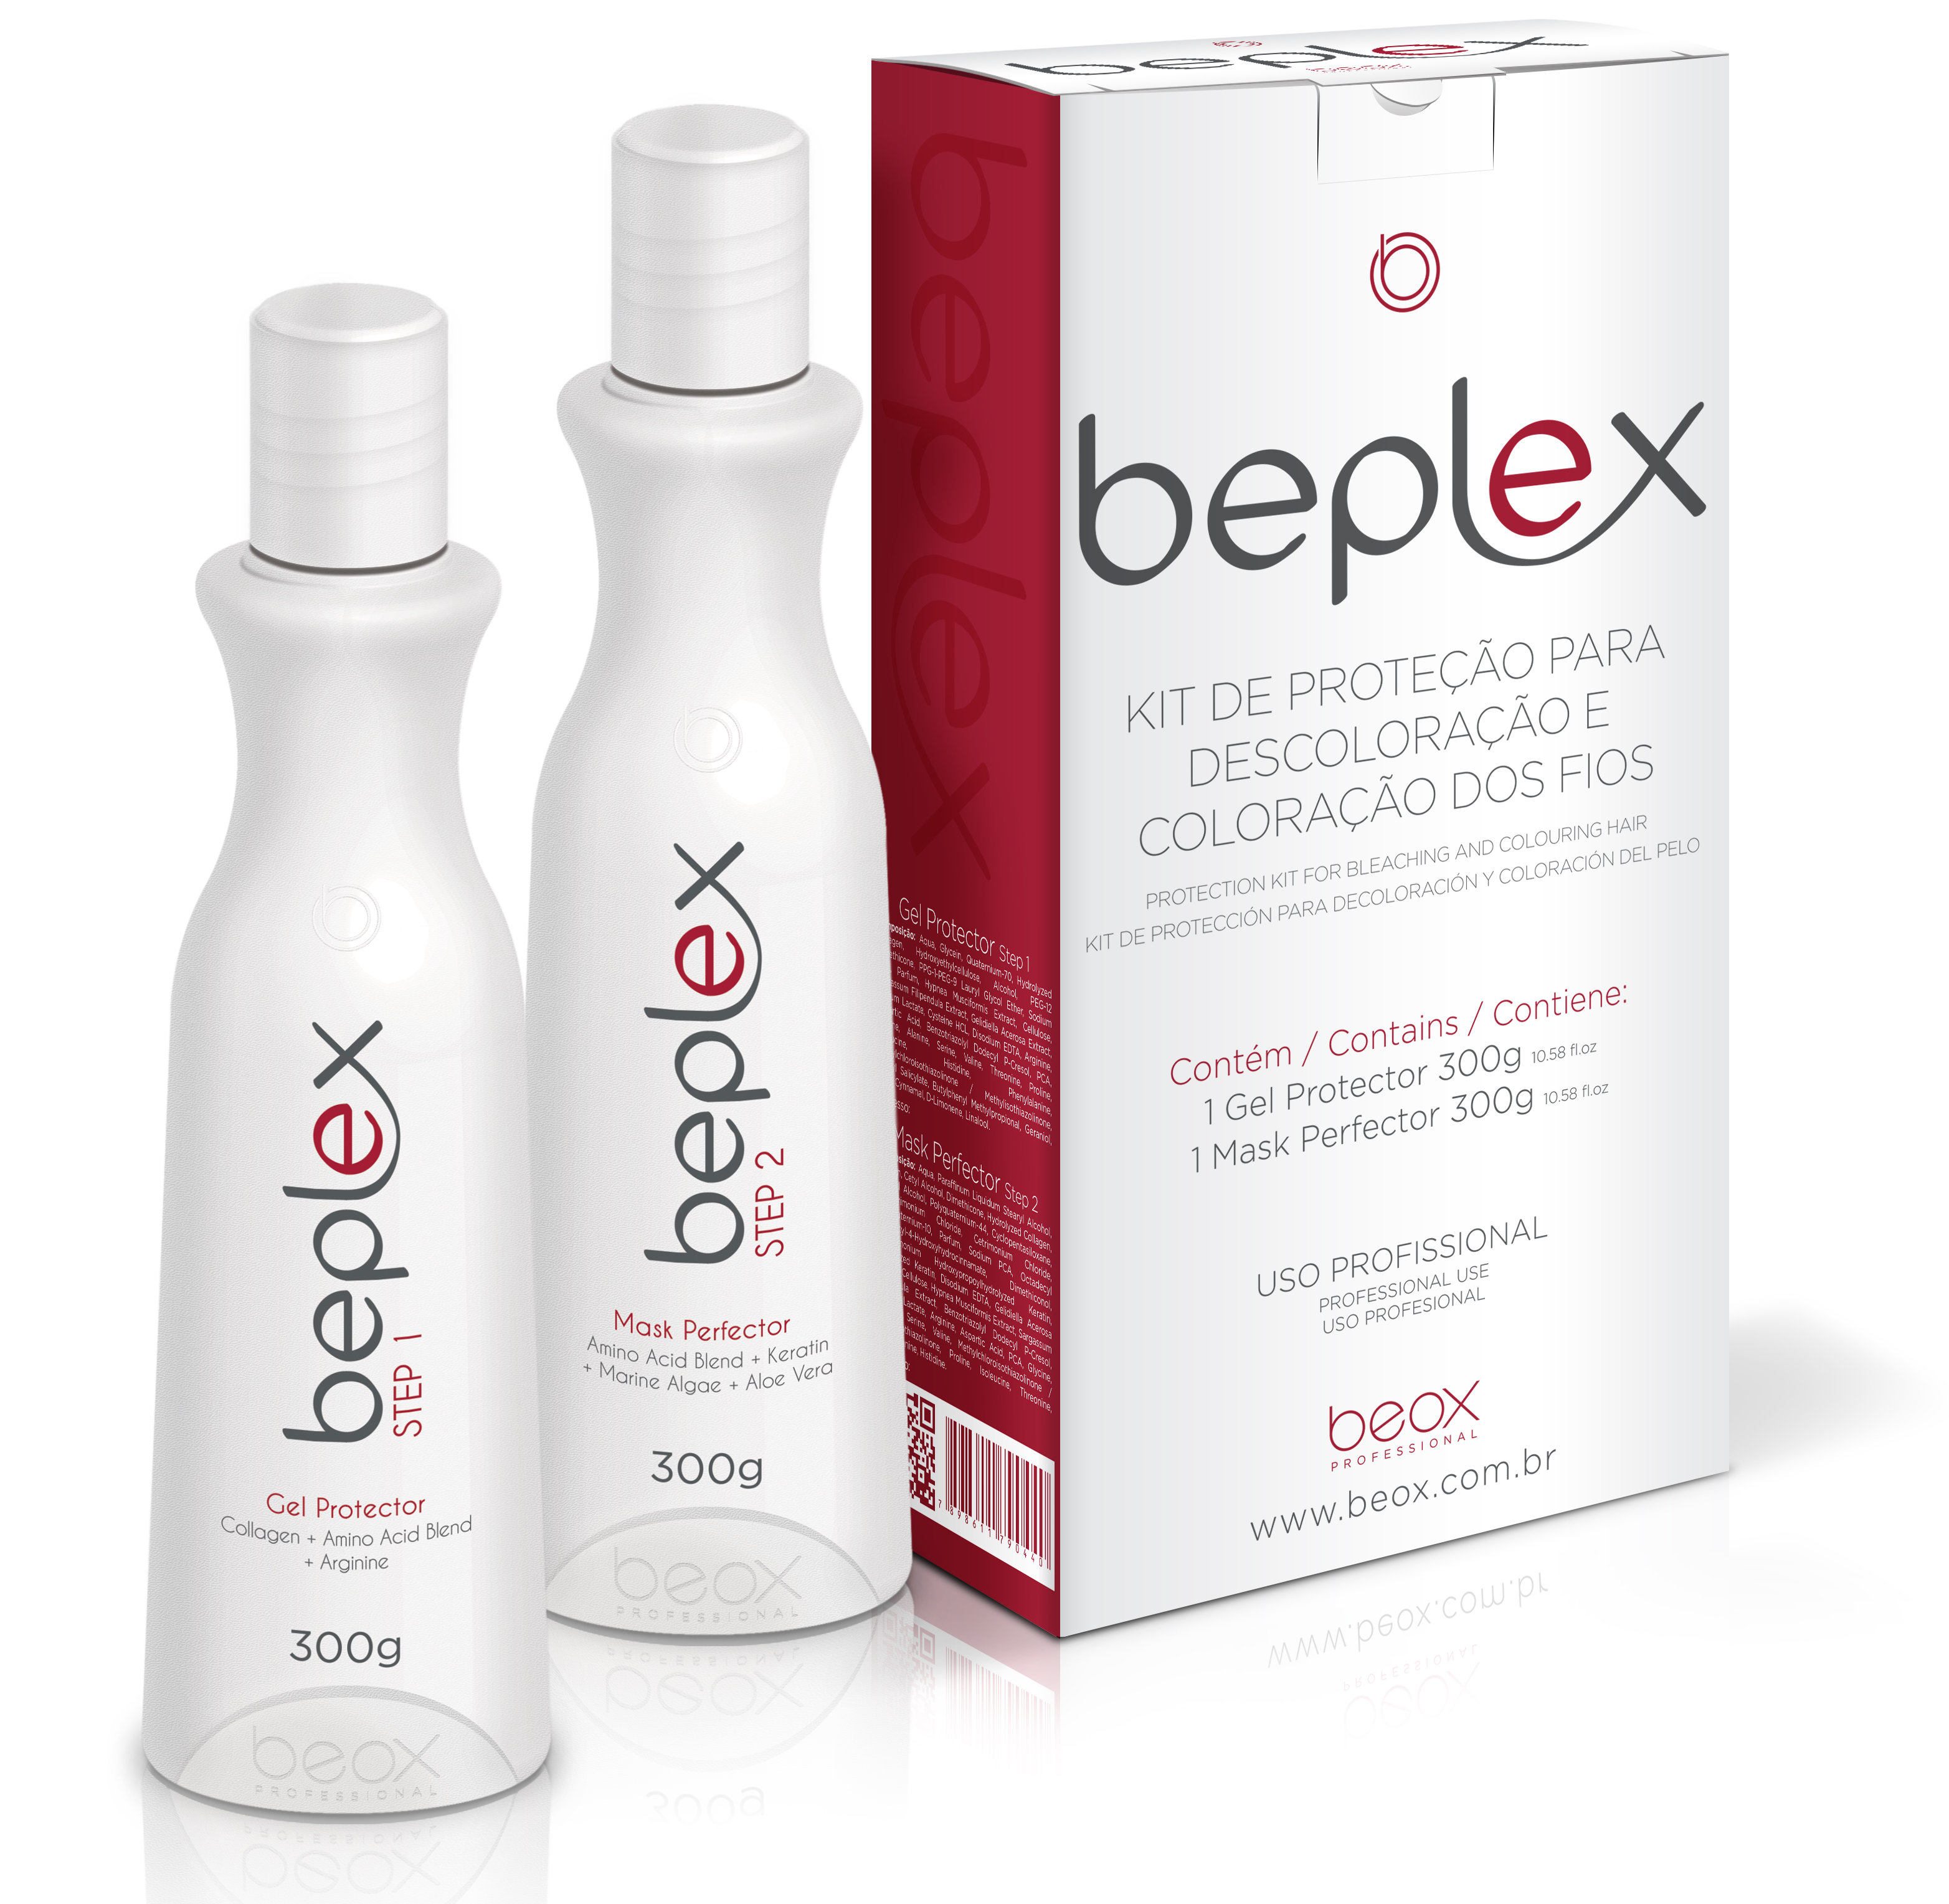 What is Plex for hair: protection or restoration? - Hair straightening -  brazilian keratin treatmnet free worldwide shipping| price in 